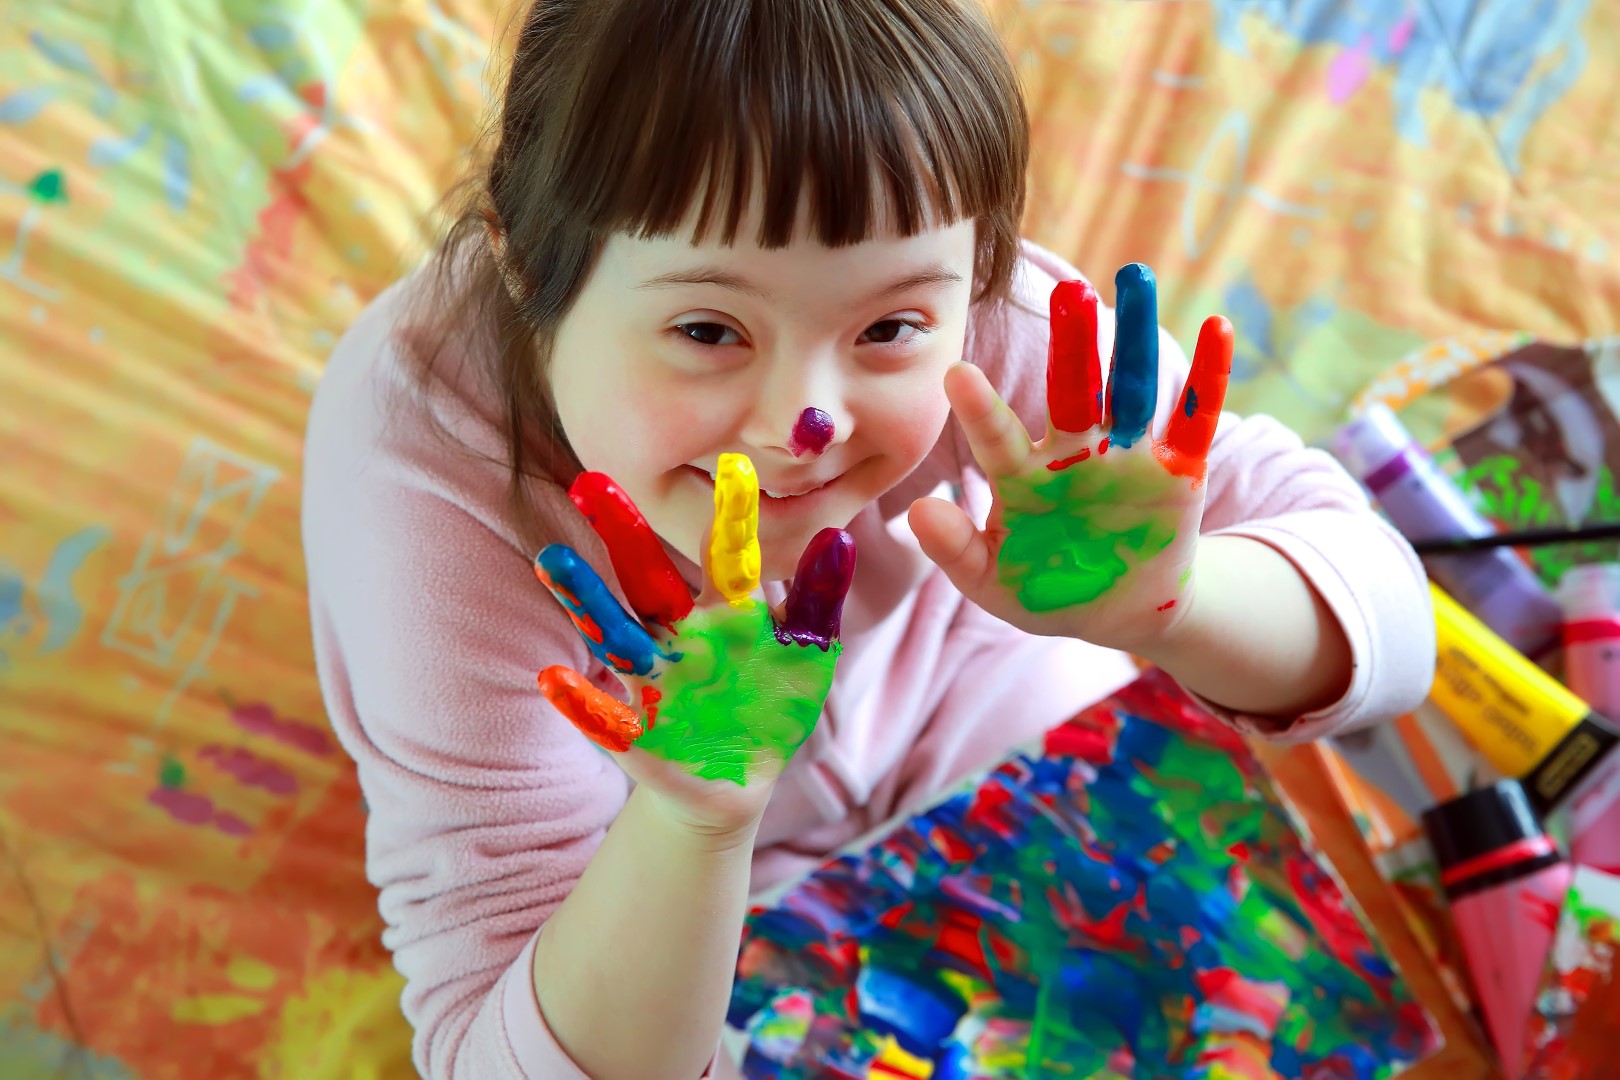 Child with different coloured paints on their hands, smiling